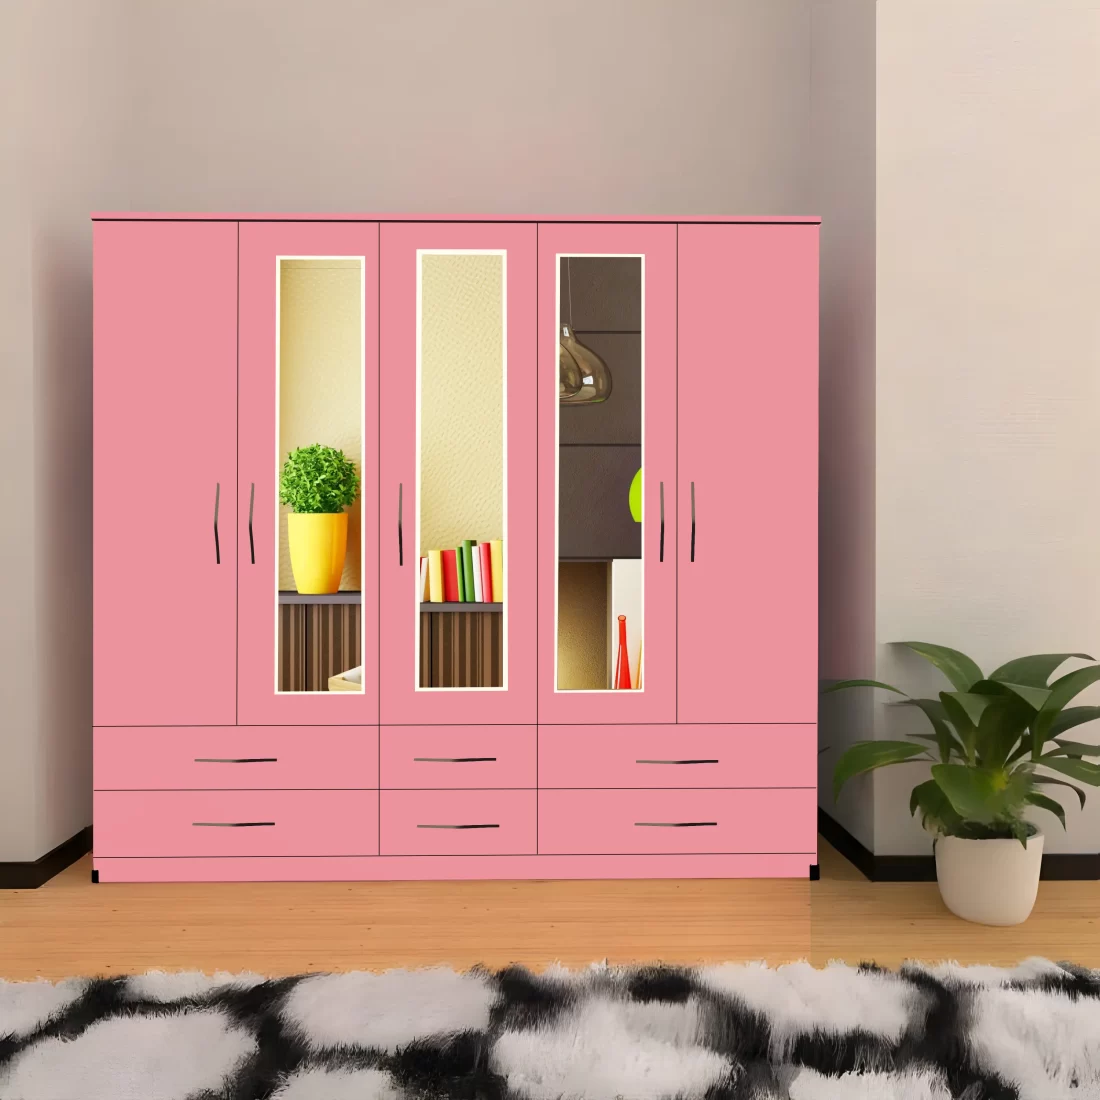 5 DOOR WARDROBE WITH 3 MIRRORS & 6 DRAWERS In PInk Colour